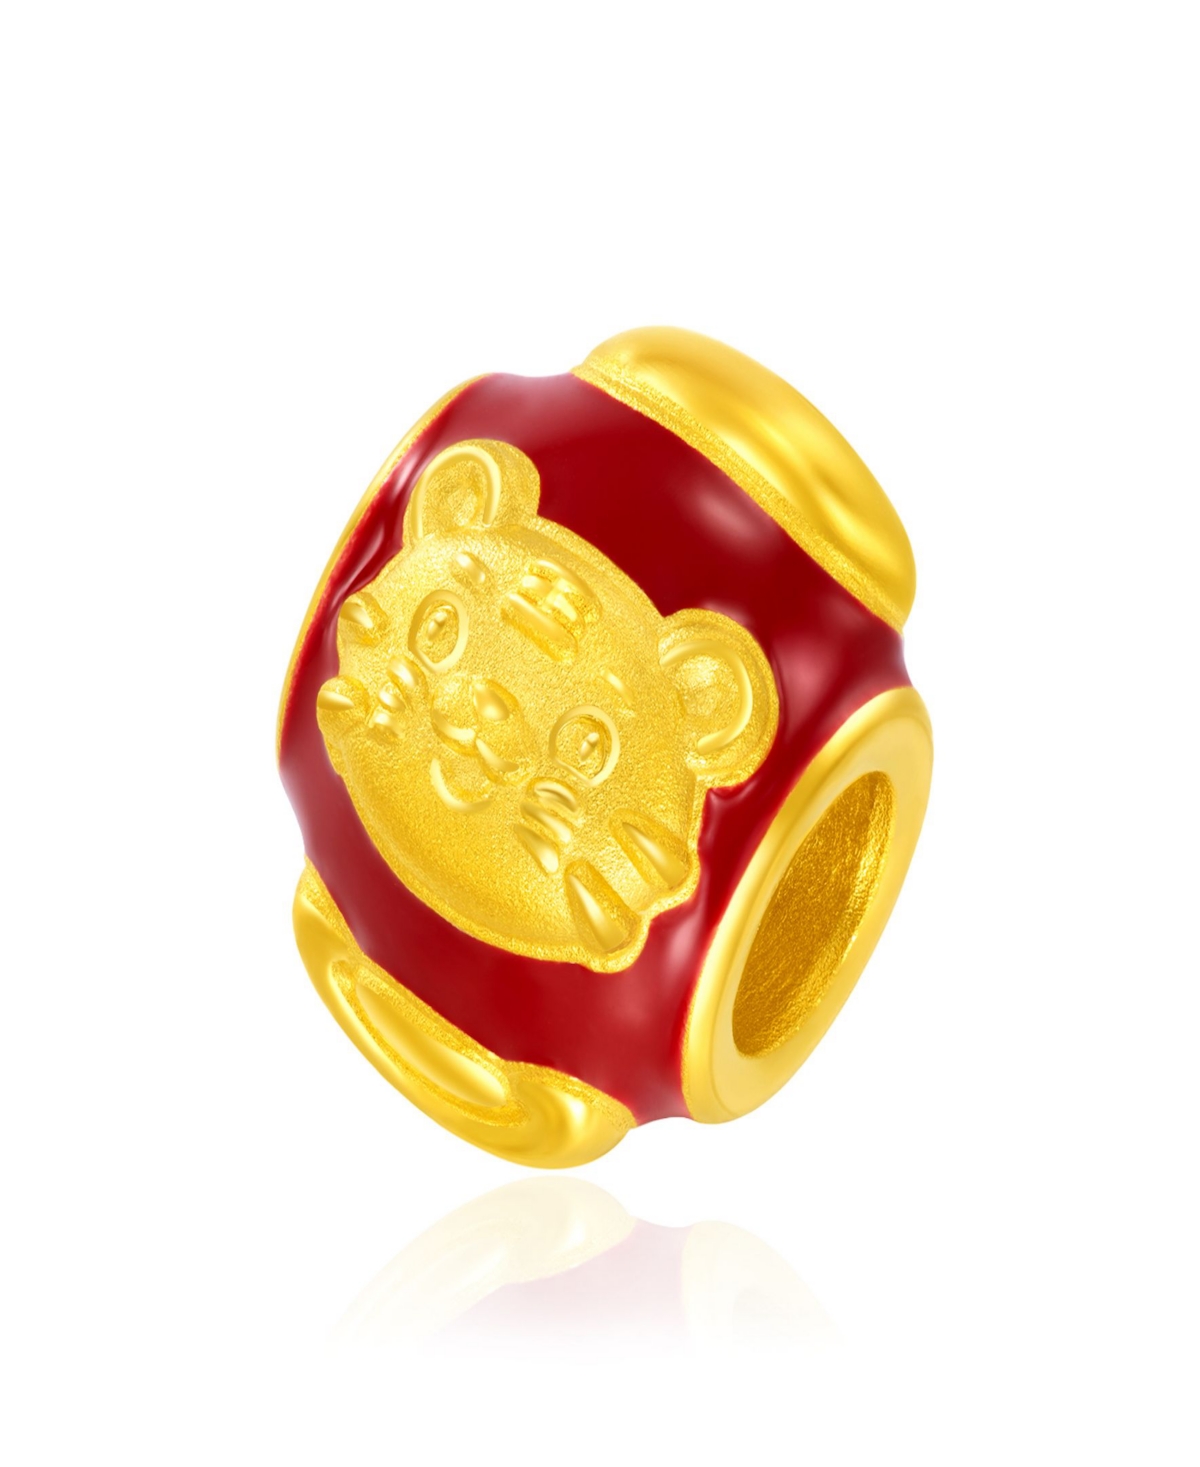 Chow Tai Fook Year of Tiger Charm in 24K Gold